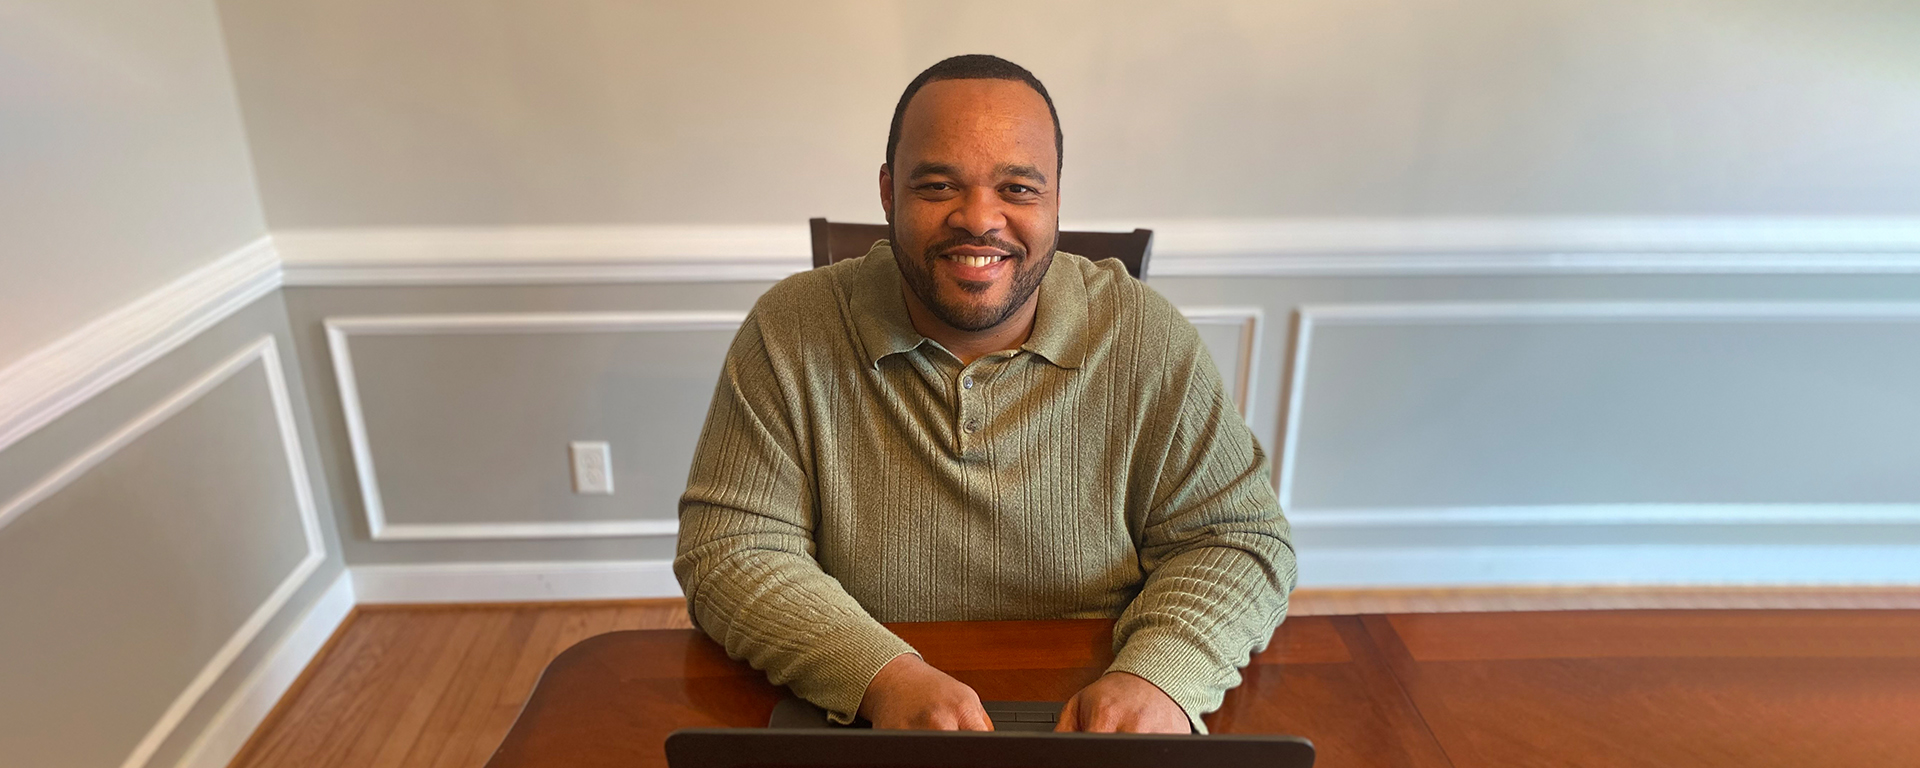 Tyrell, Capital One associate, sits at his home desk and talks about finding his passion at Capital One